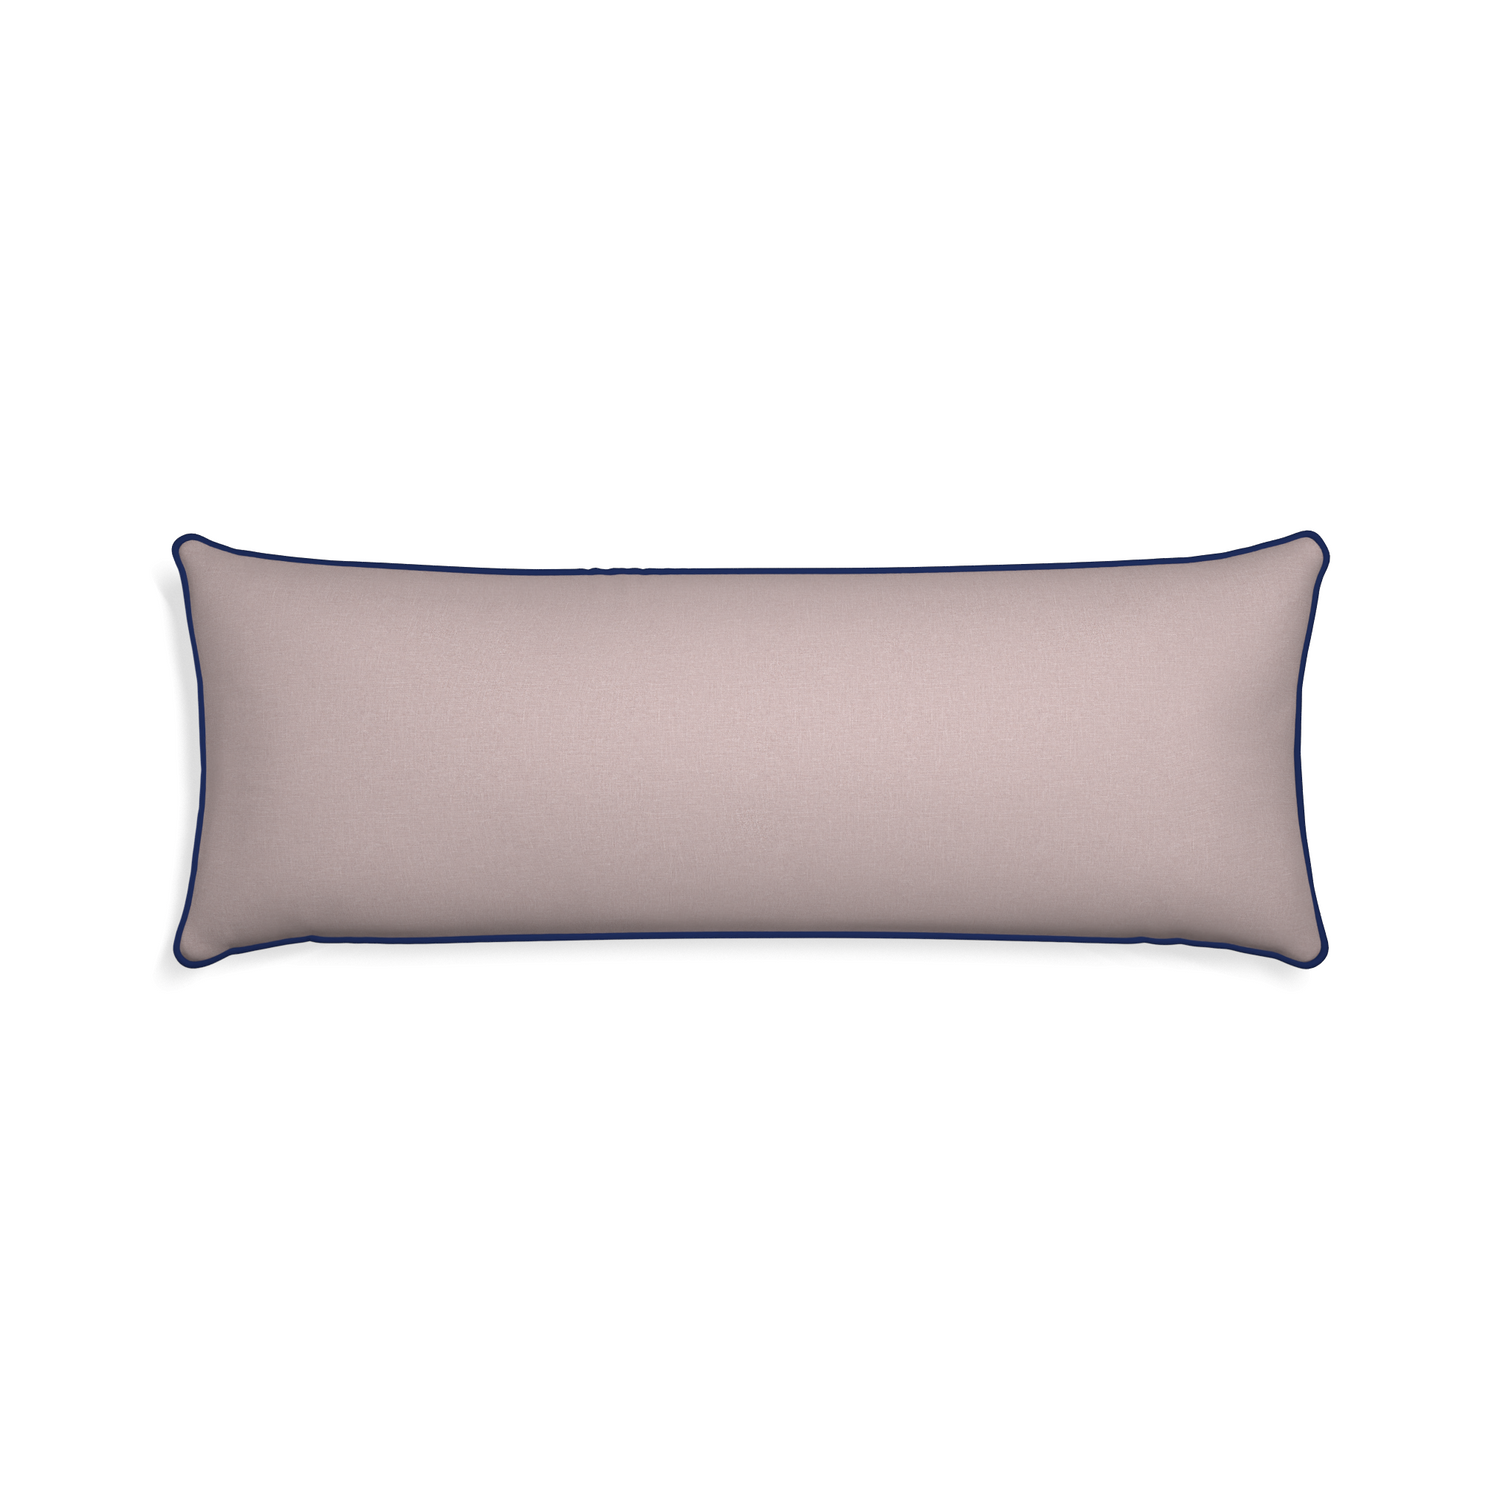 Xl-lumbar orchid custom mauve pinkpillow with midnight piping on white background